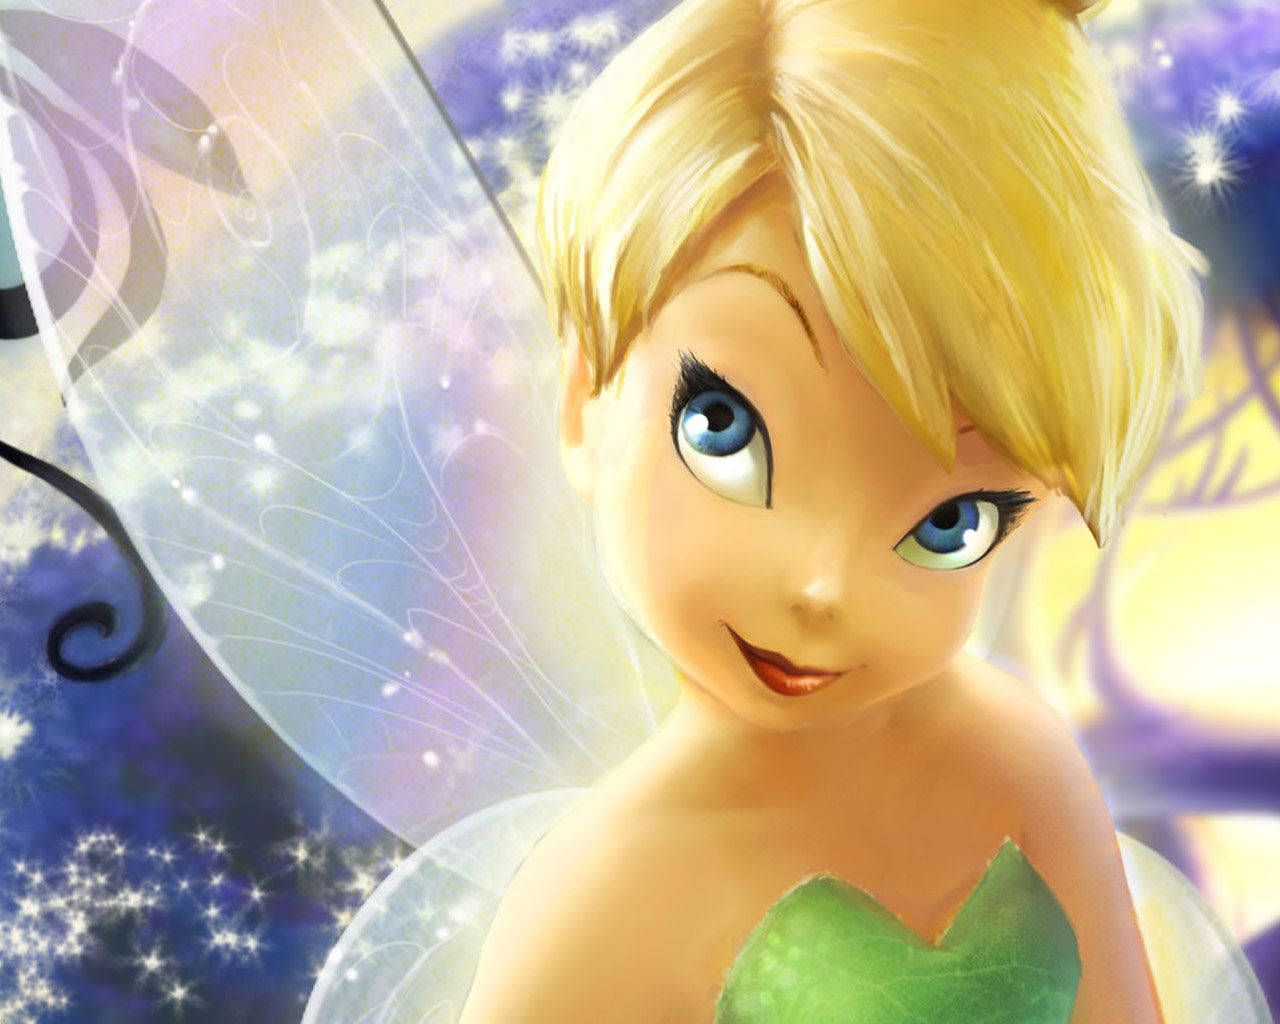 Tinkerbell Wallpaper Full HD, 4K Free to Use